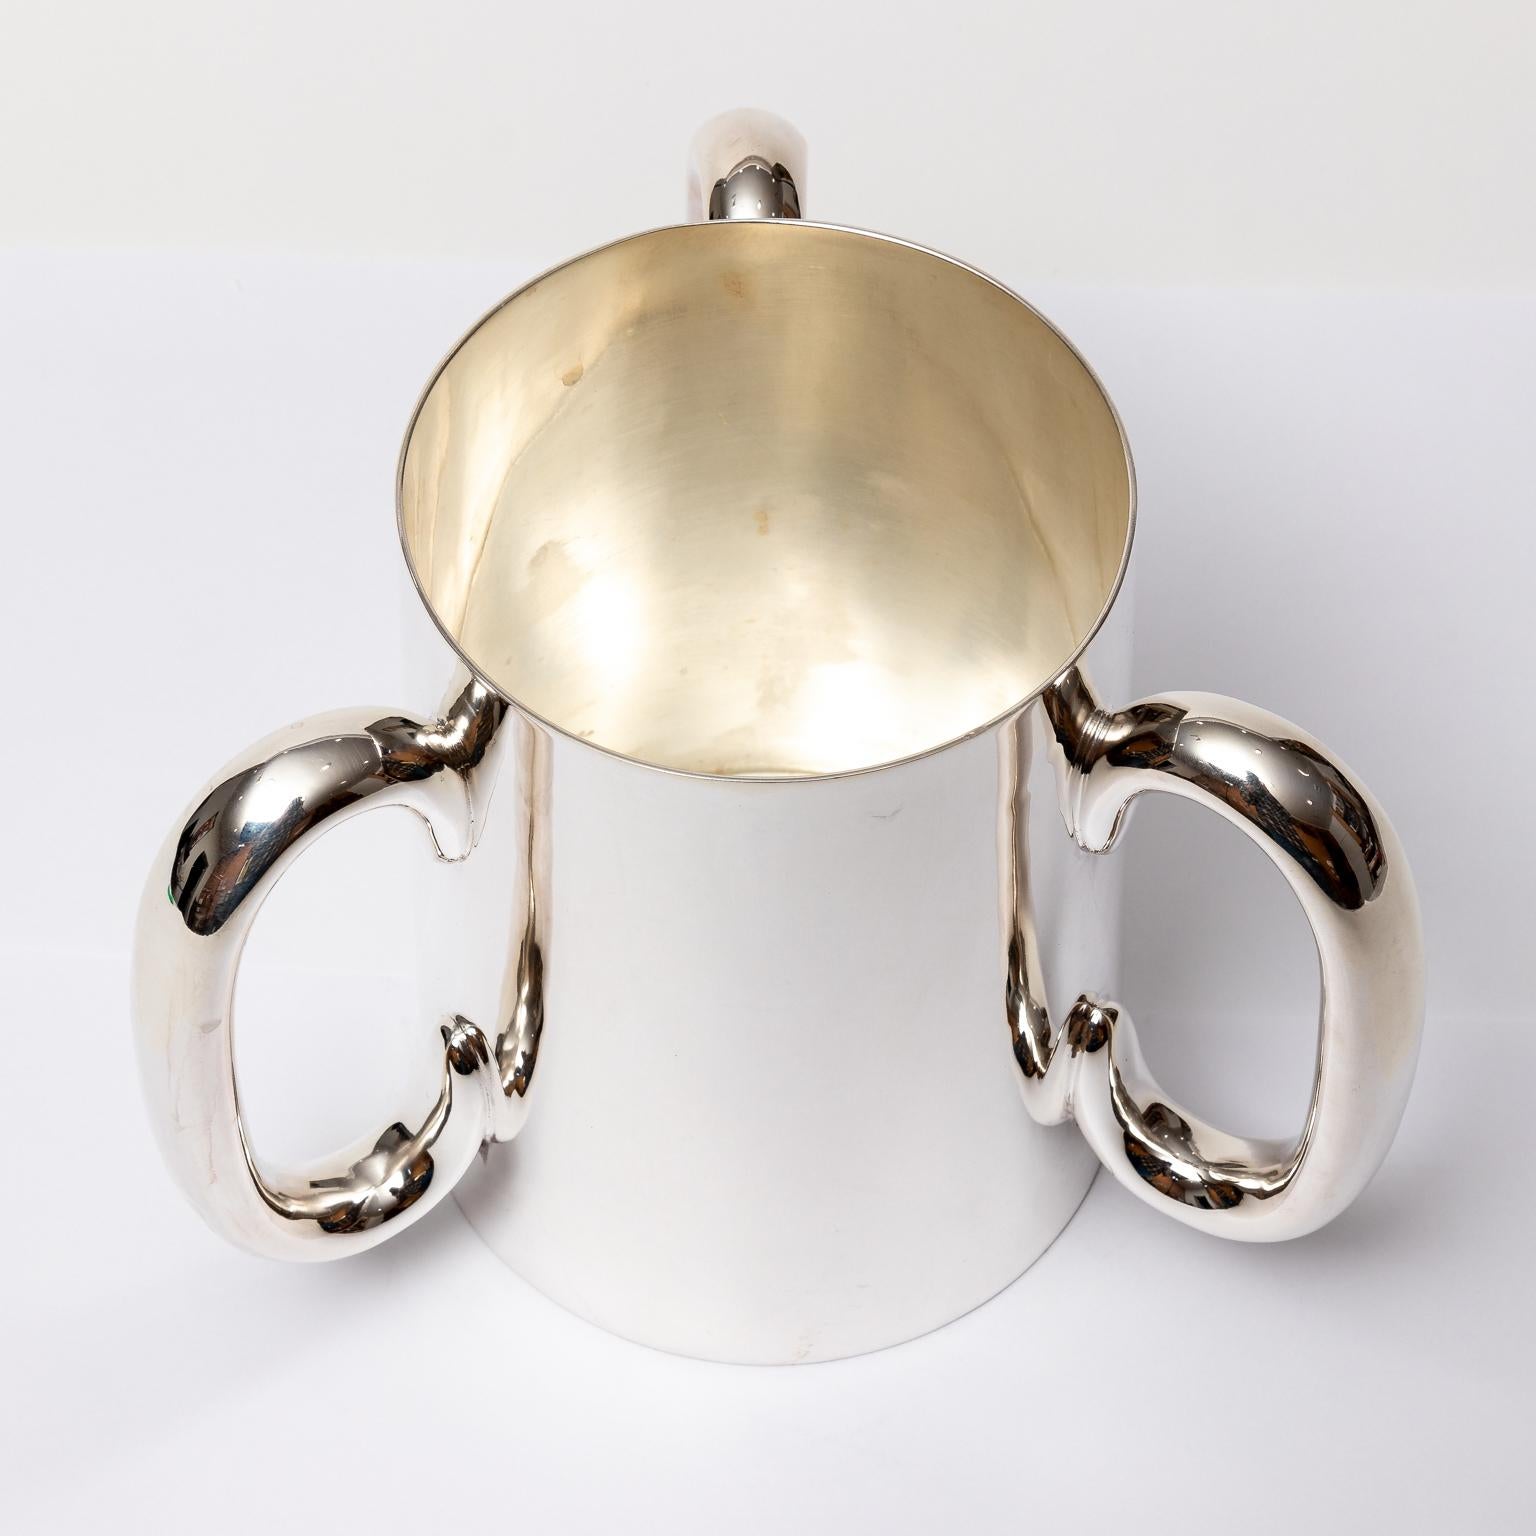 Circa 1930s English silver plate loving cup with tri handle. Made in England. Please note of wear consistent with age.